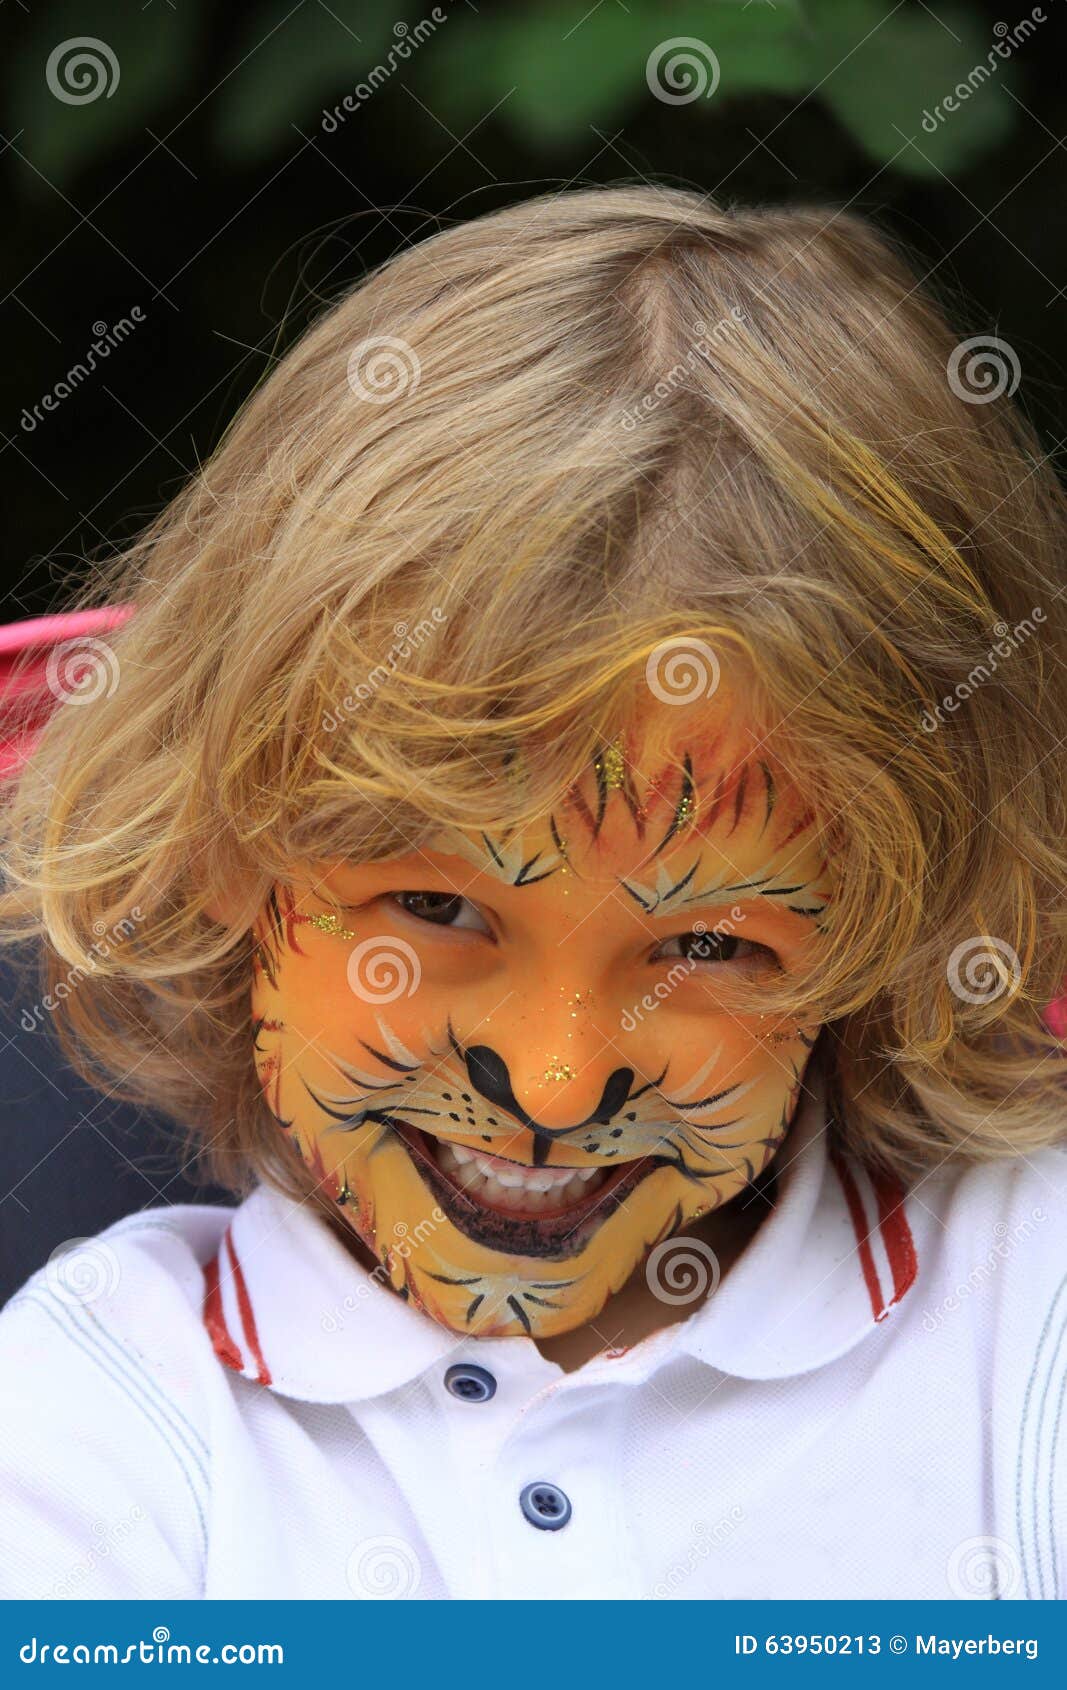 Kid Lion Face Painting - Free Royalty-Free Stock Photos from Dreamstime